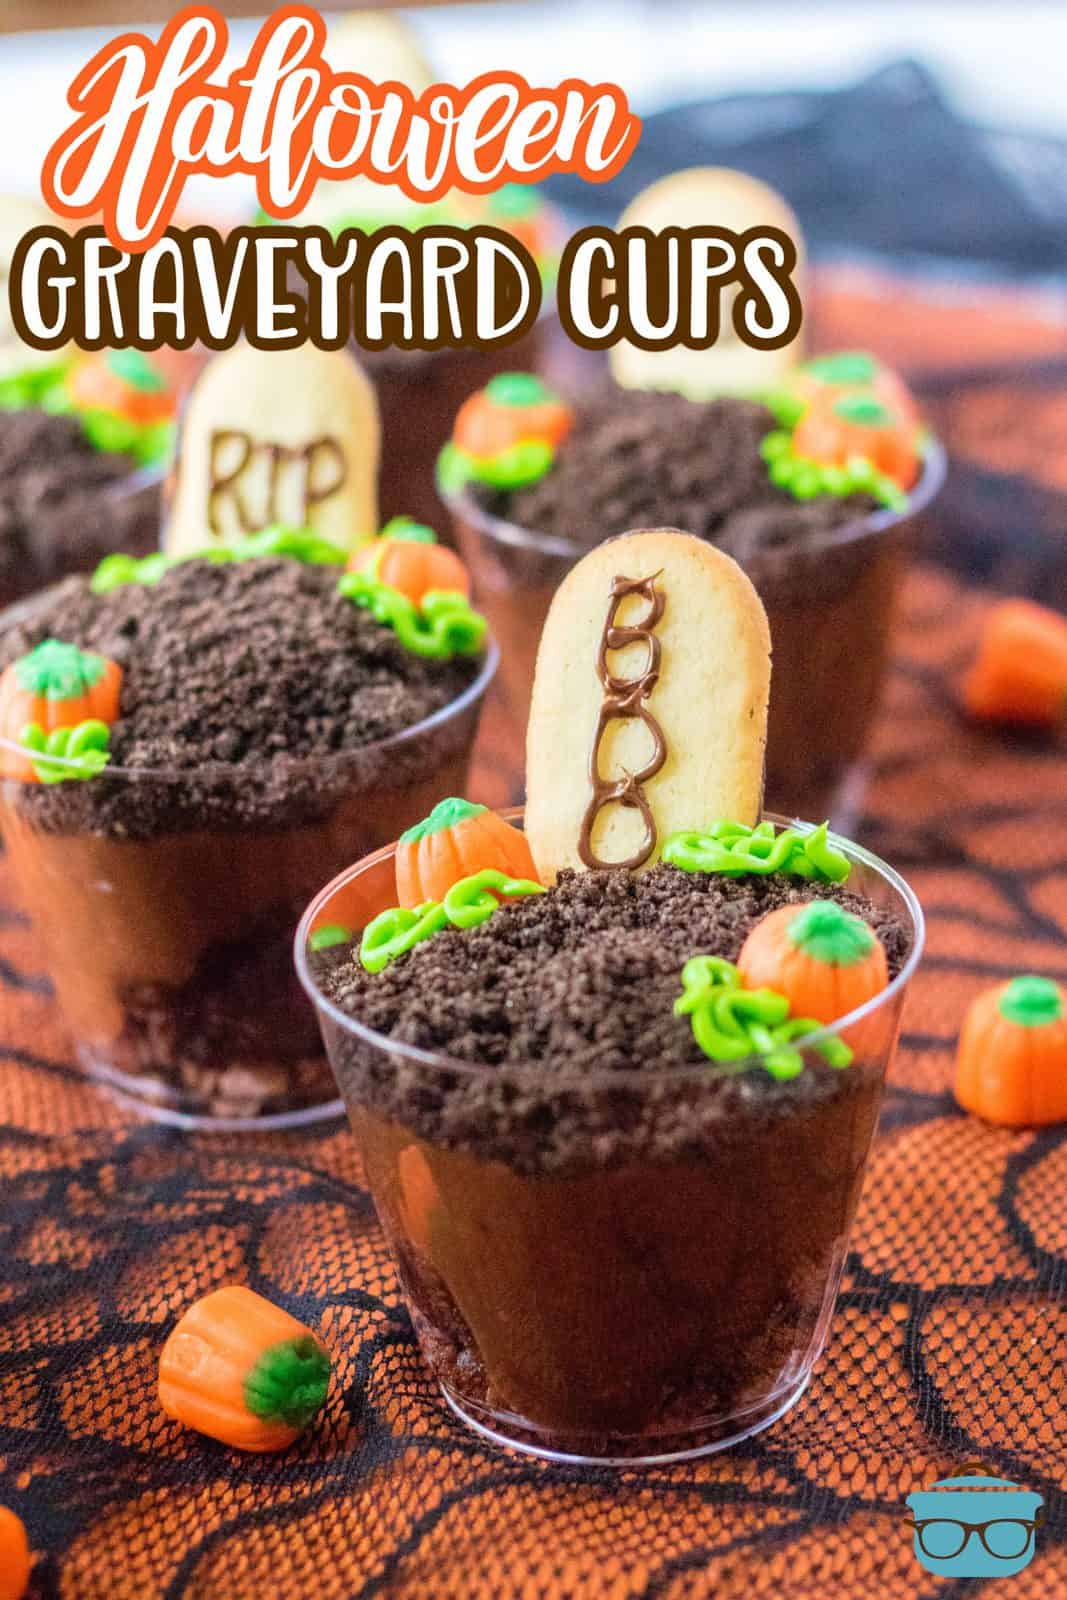 Close up of Halloween Graveyard Cups shown on orange and black lace. 